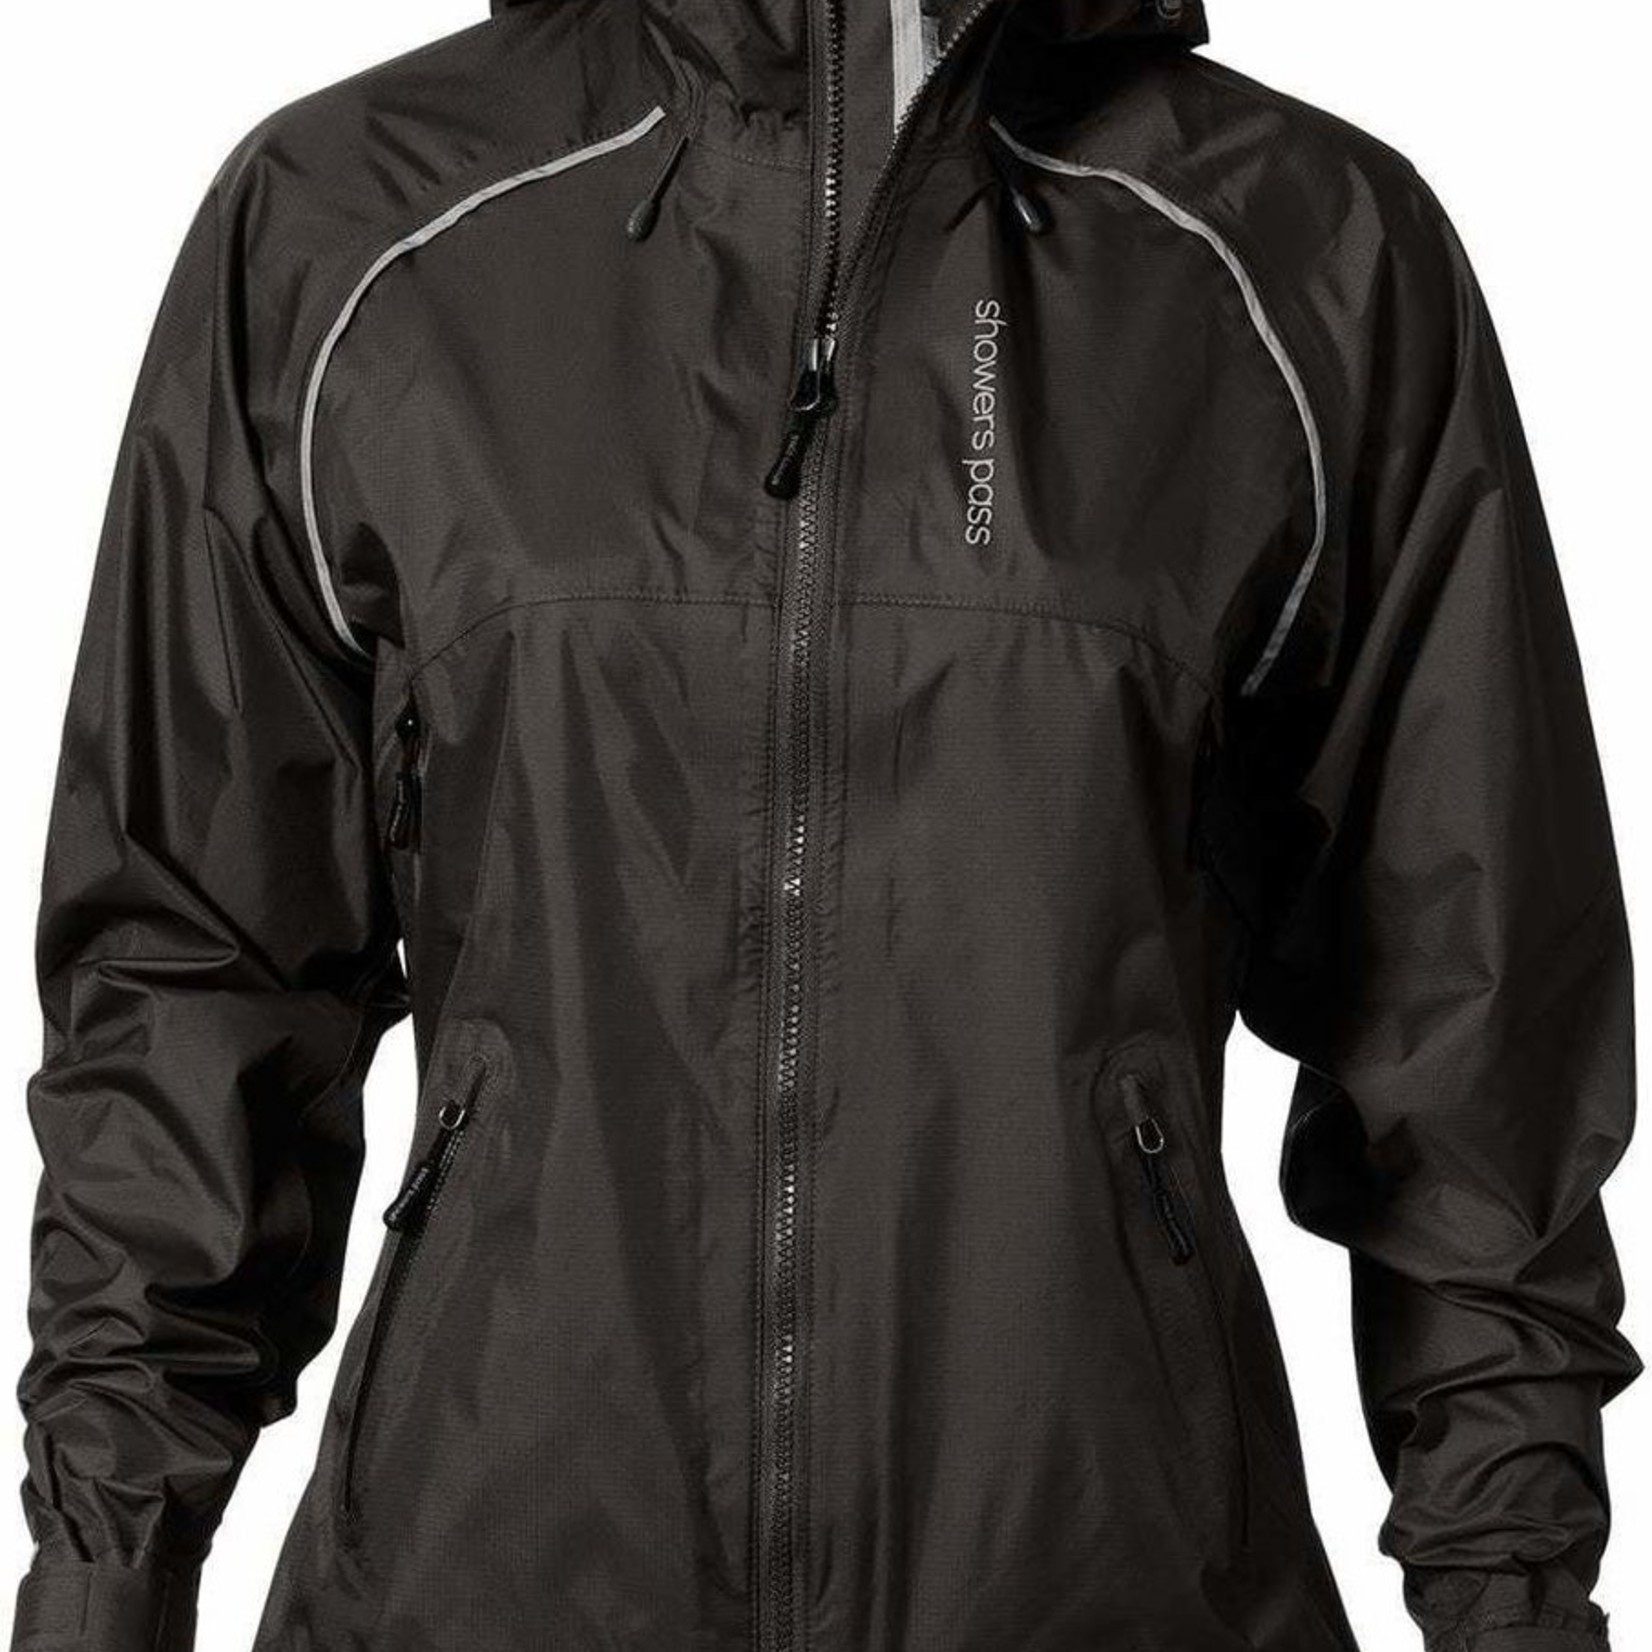 Showers Pass Women's Syncline  CC Jacket